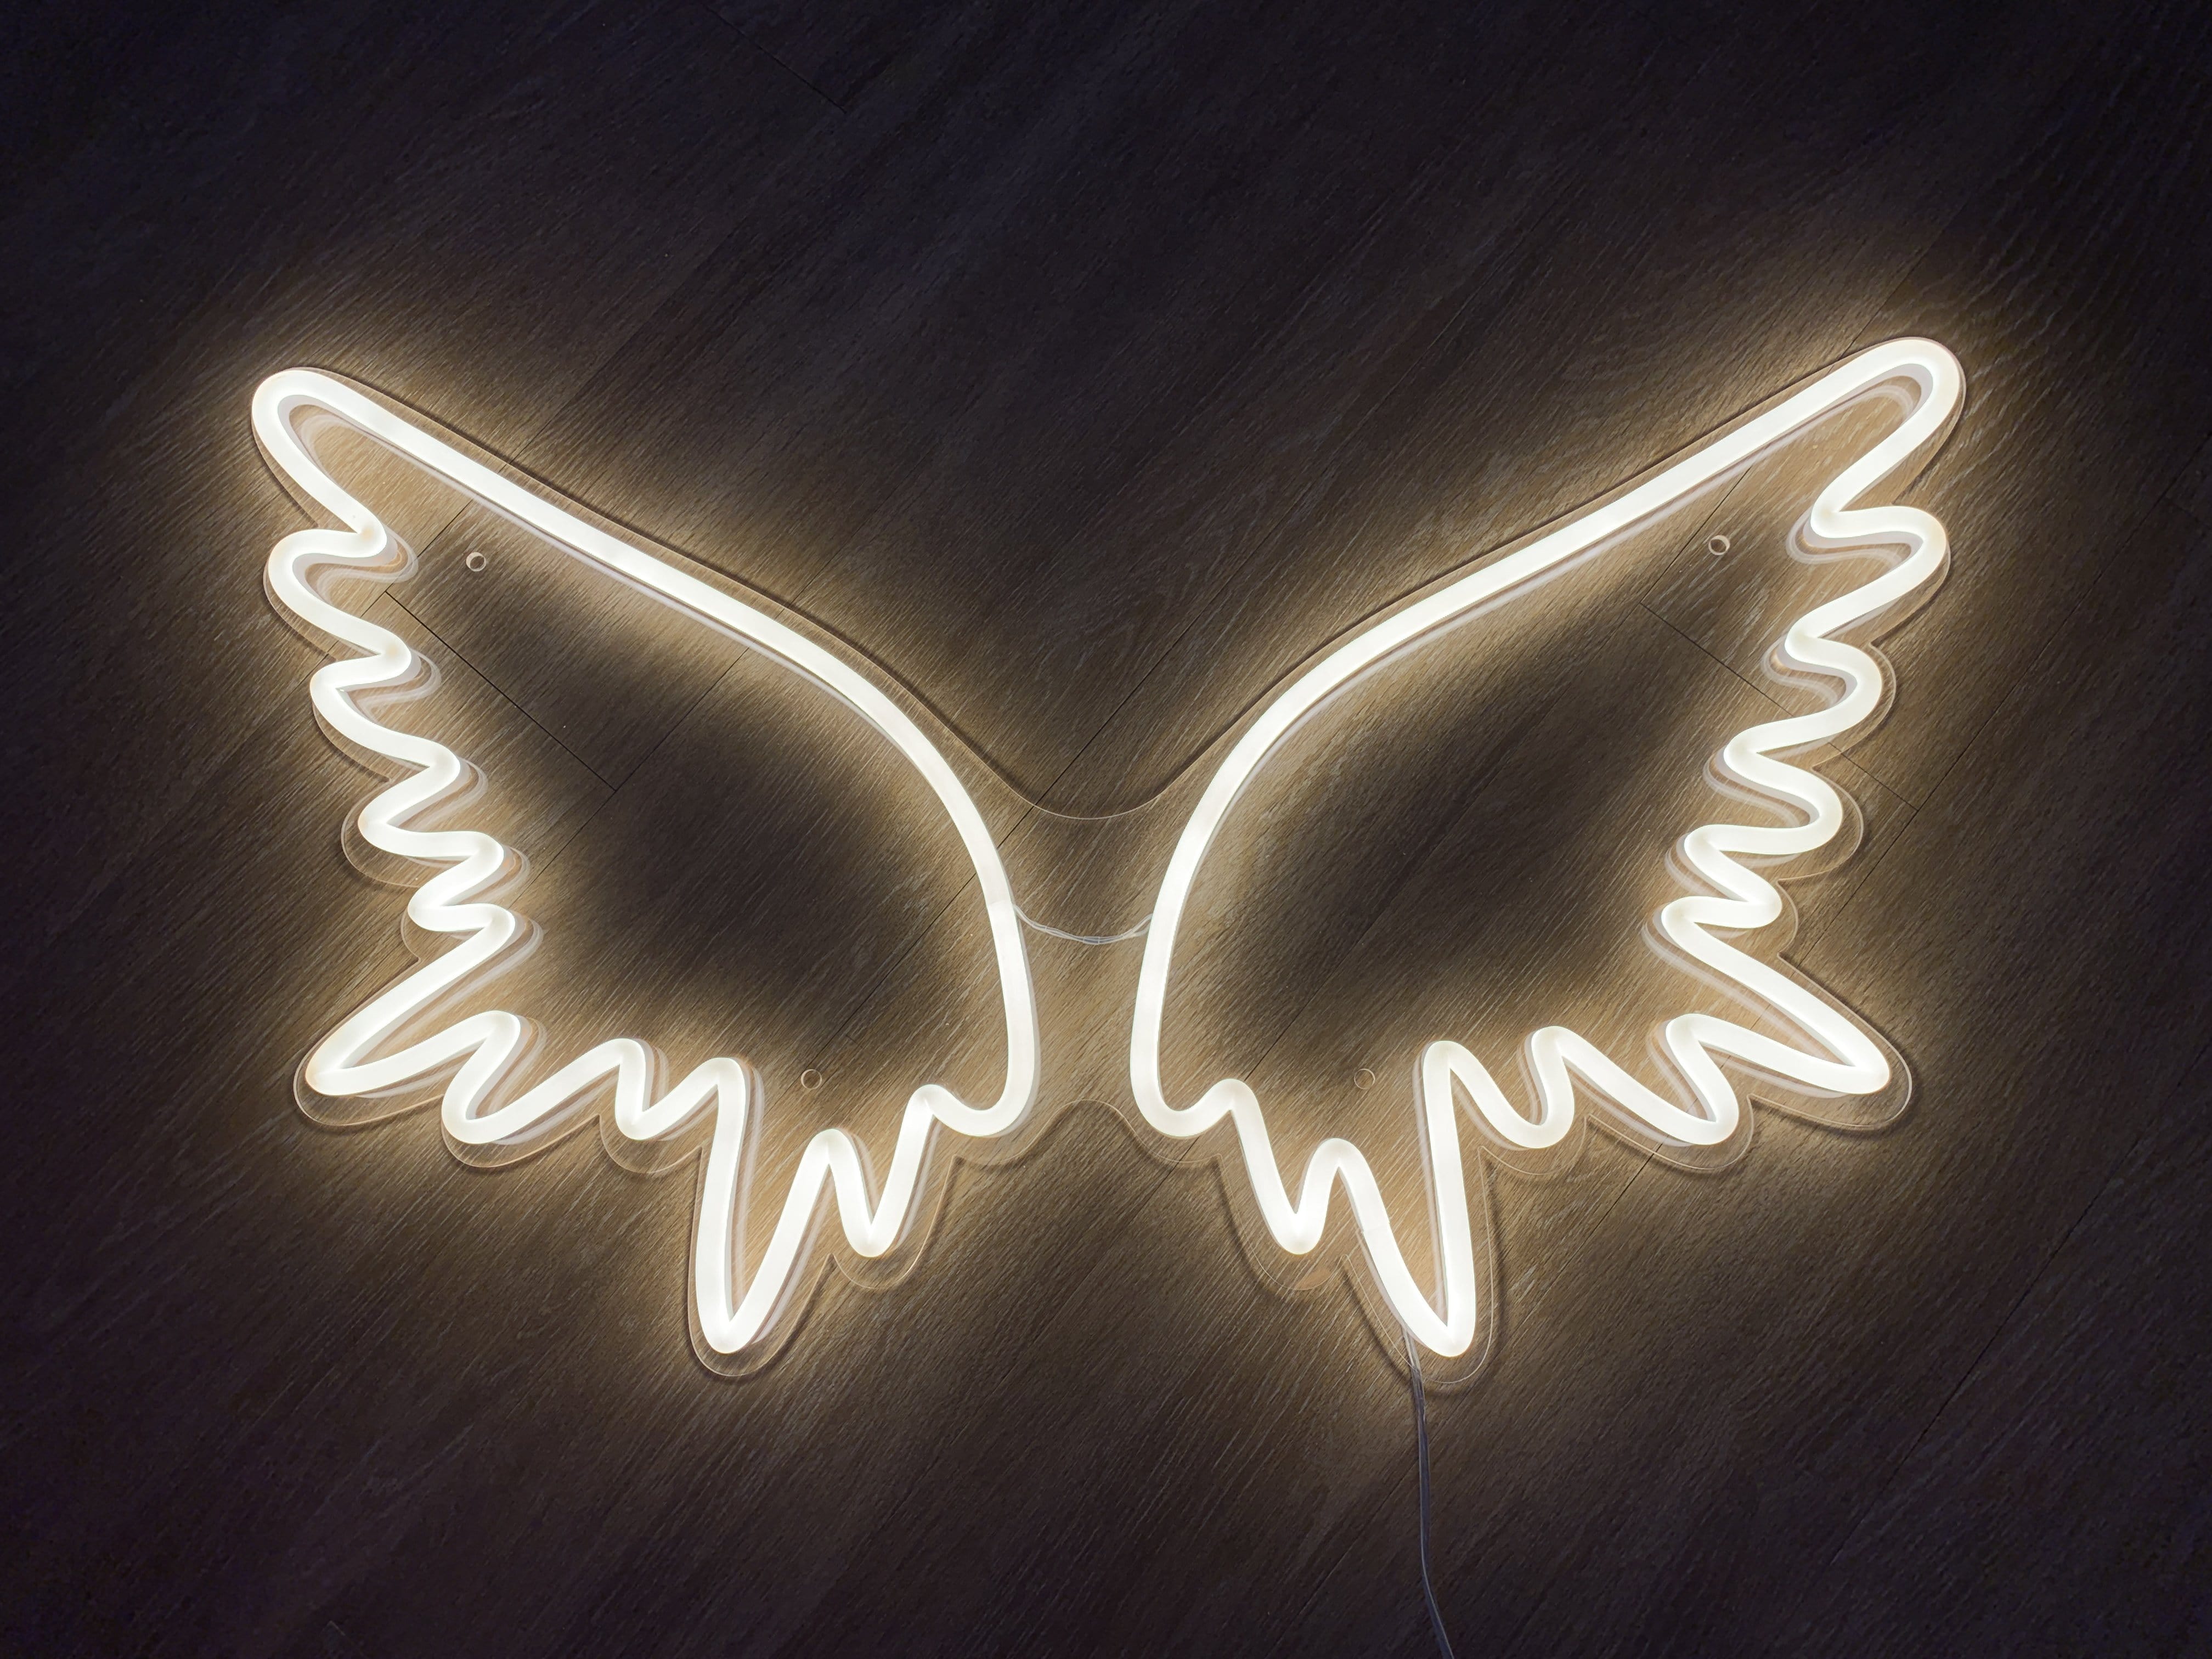 A neon sign of two wings - Wings